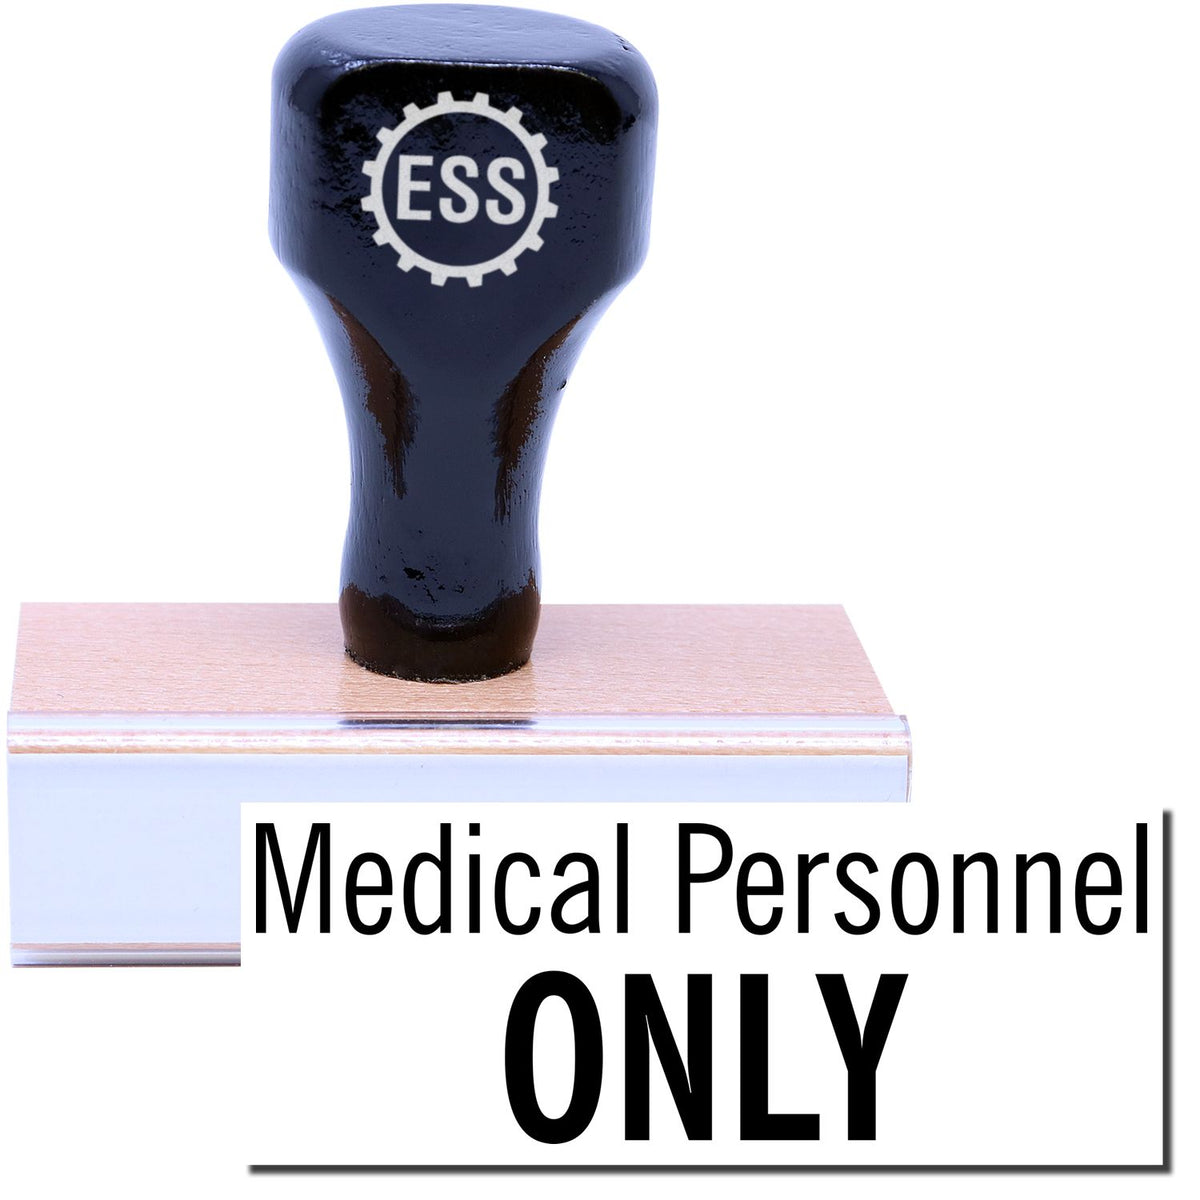 Medical Personnel Only Rubber Stamp